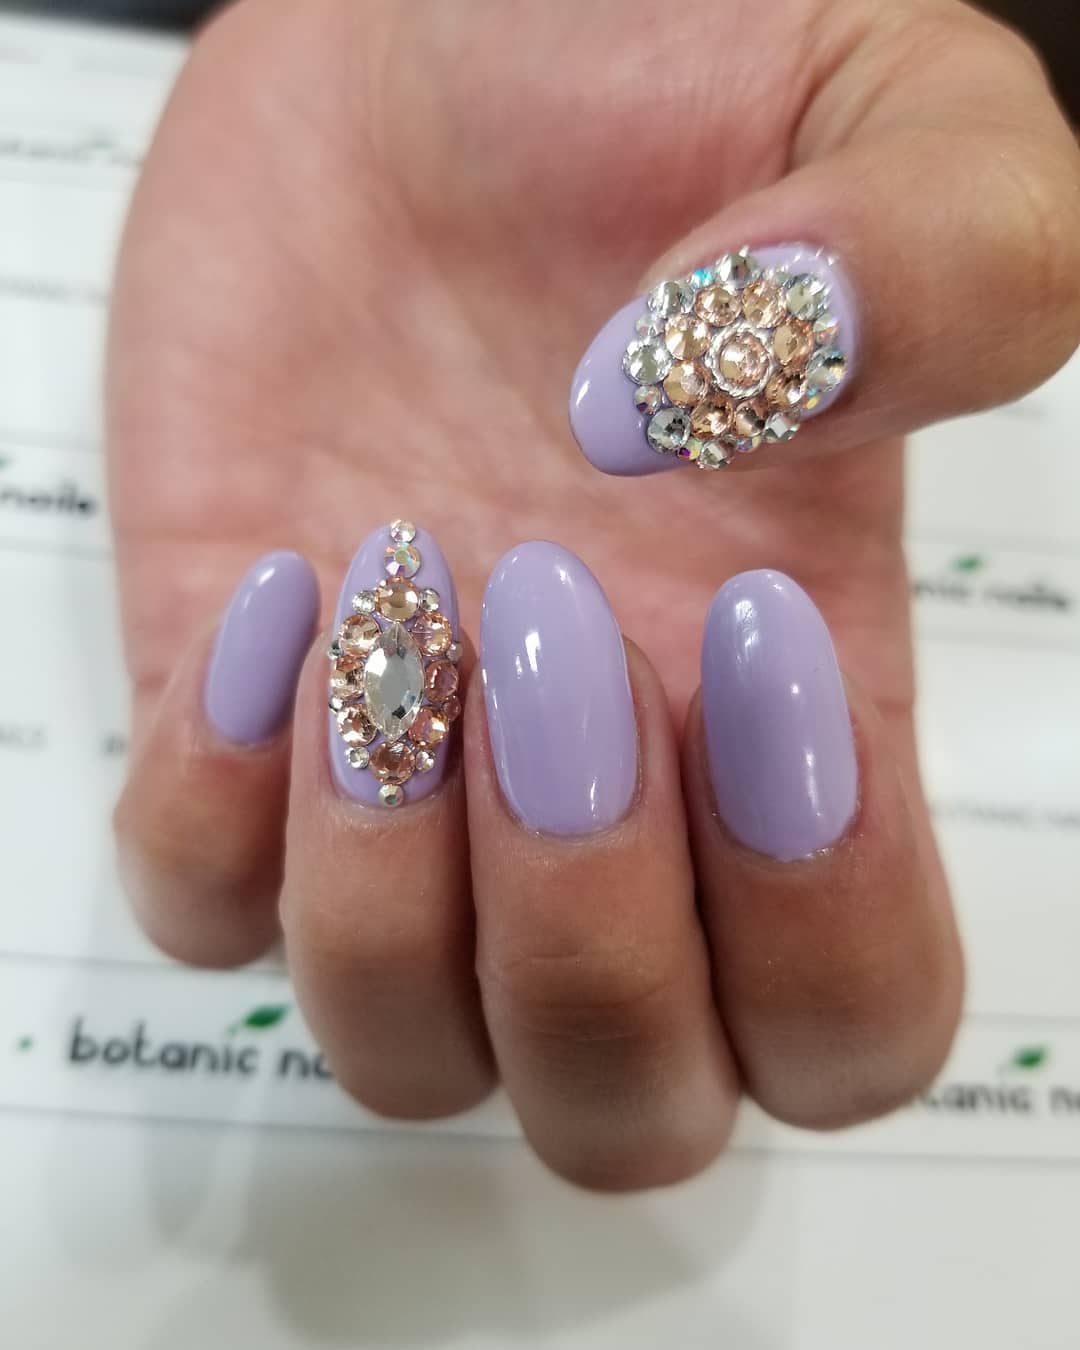 70 Popular Oval Nail Art Designs and Ideas